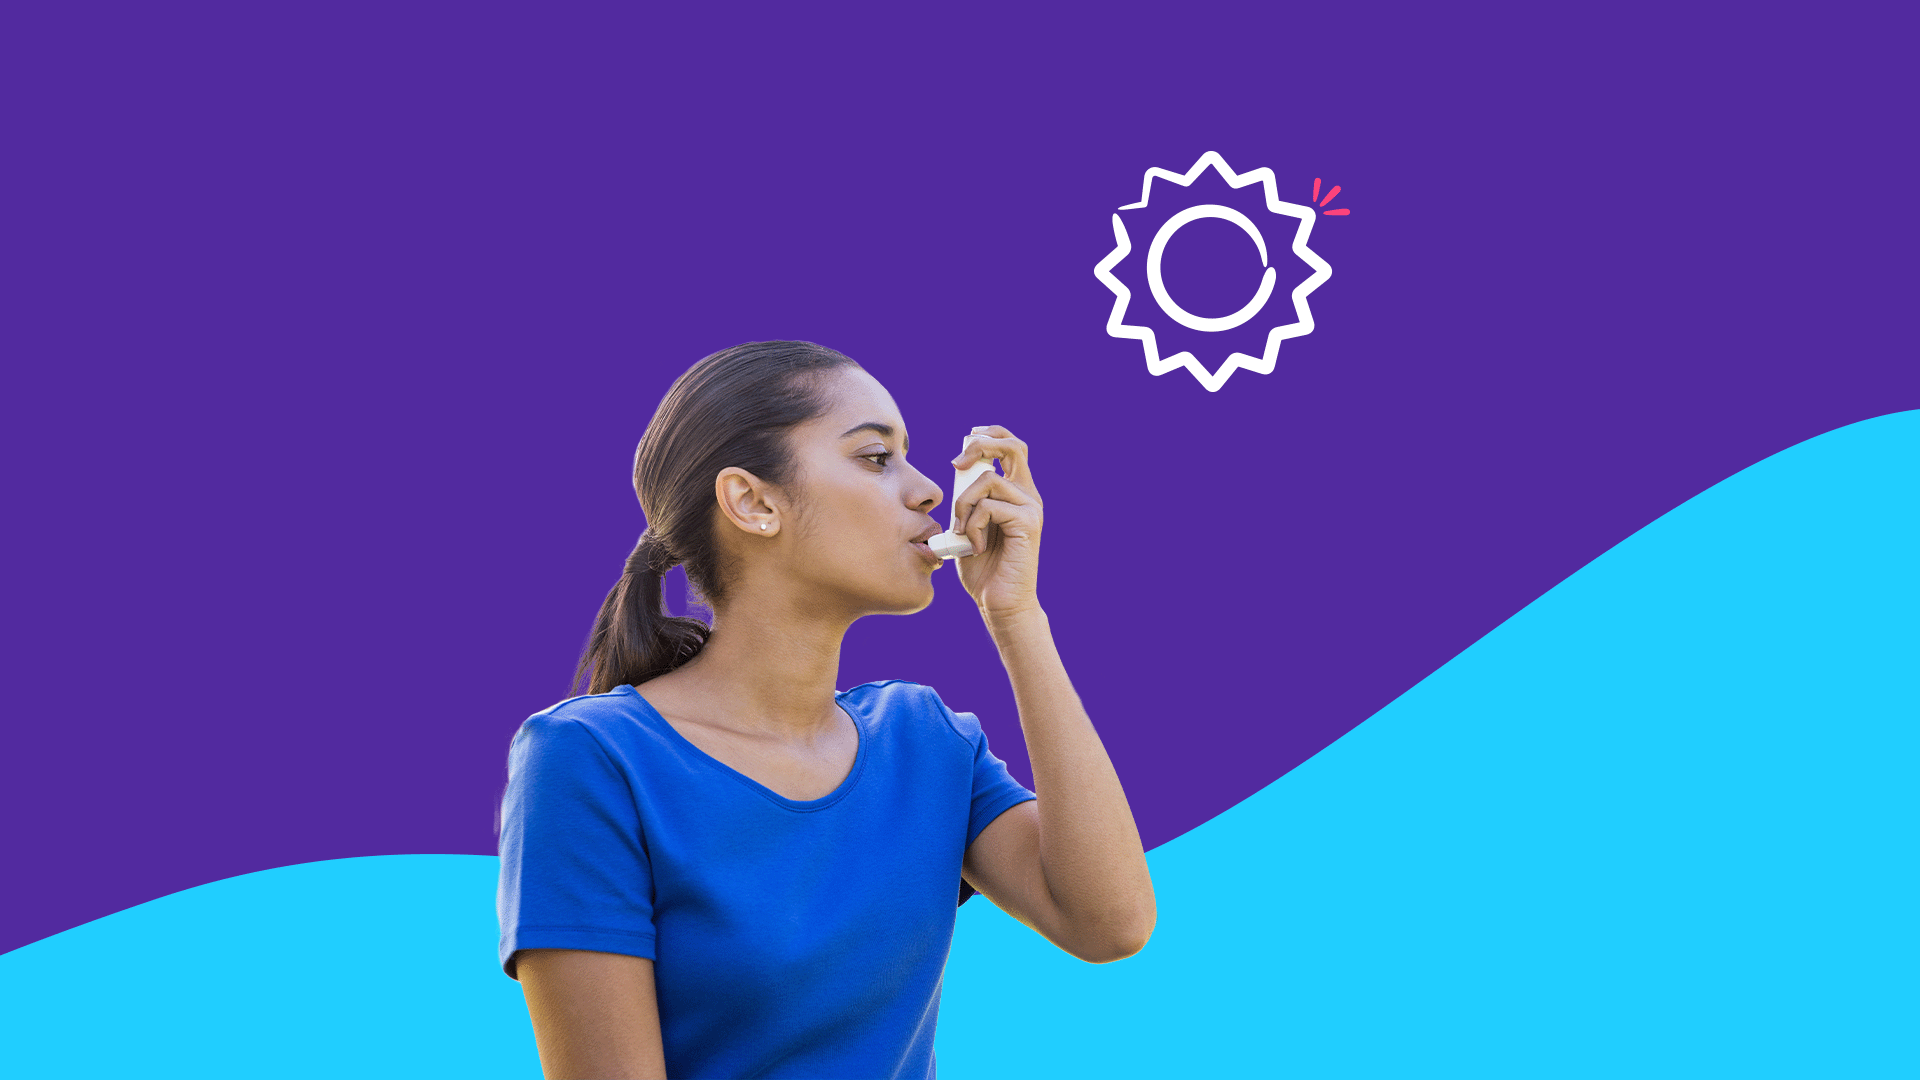 A woman under a sun using an inhaler represents medical conditions exacerbated by heat